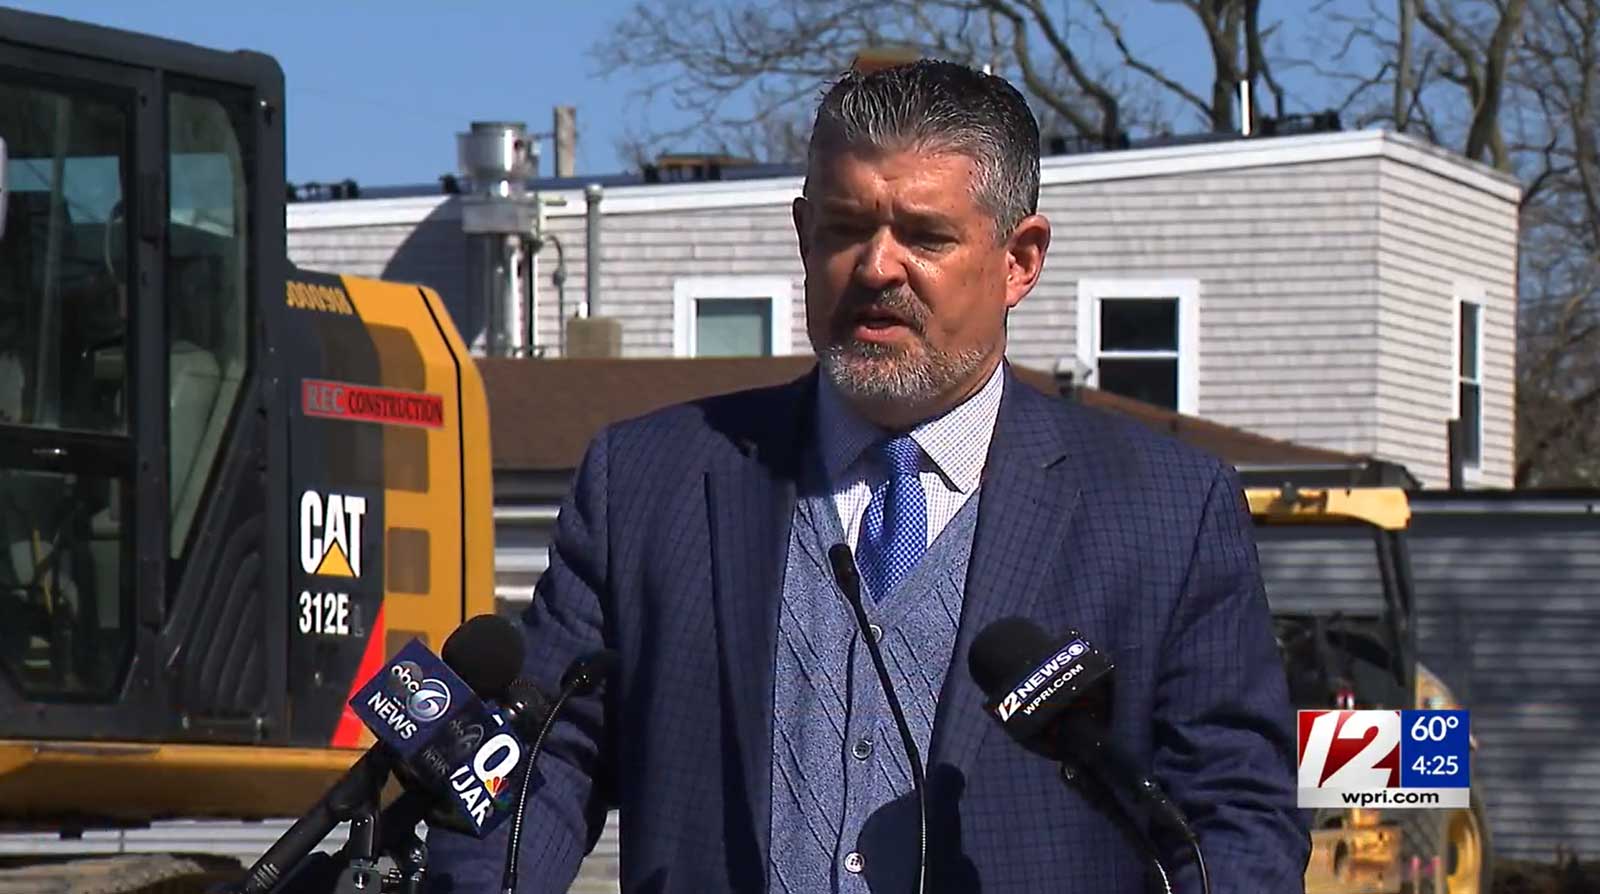 Rep. Matthew Dawson speaks at the groundbreaking event for the Residences at Riverside Square on Monday, April 10, 2024. Image screengrab from WPRI.